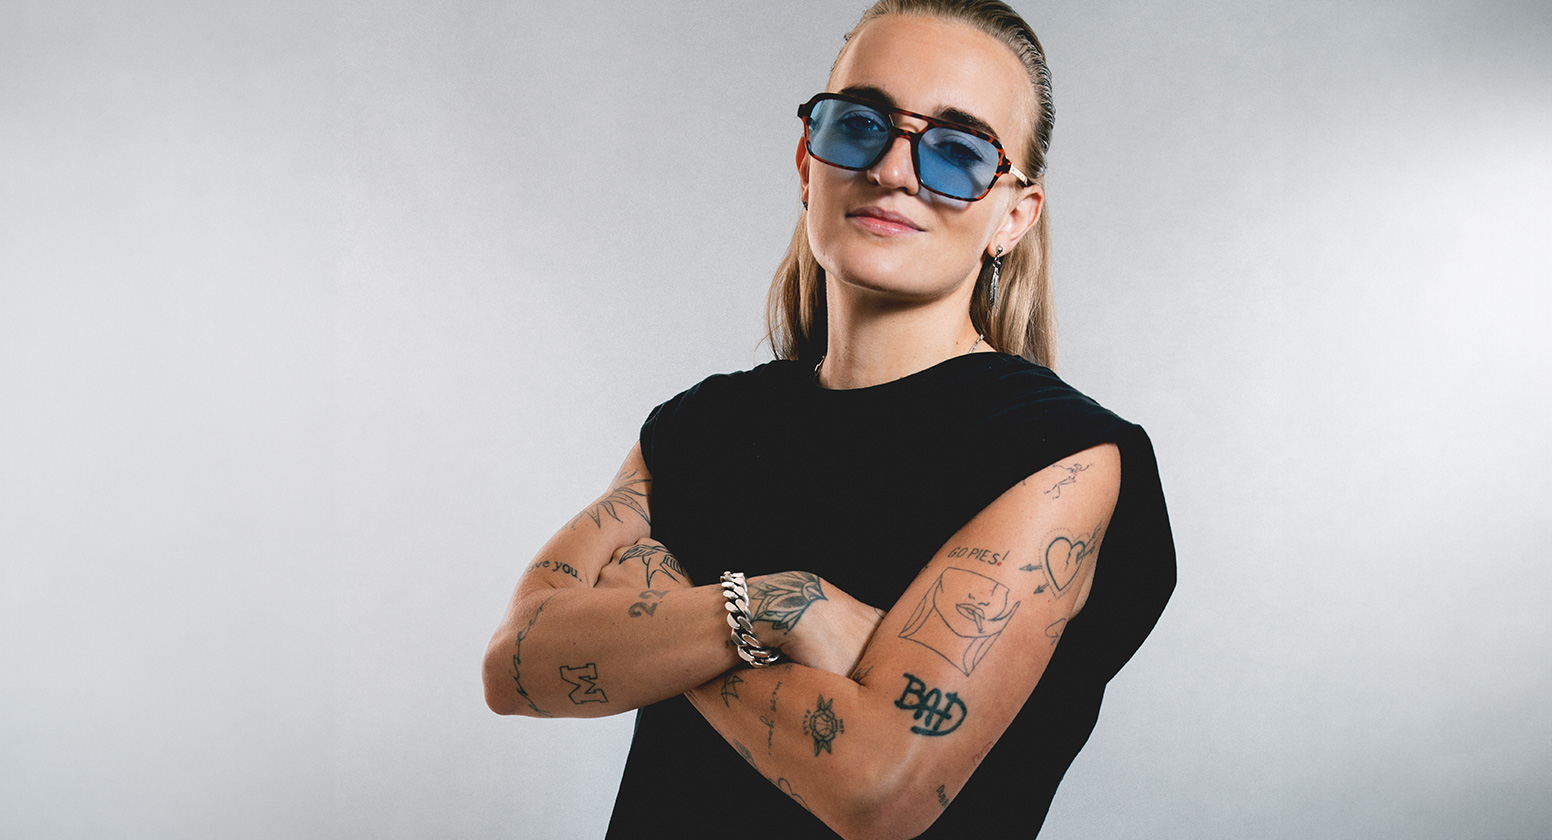 G Flip stands with a confident stance, wearing a black t-shirt and blue jeans, stands against a grey background. They sport various tattoos on their arms, sunglasses, and a silver chain bracelet.